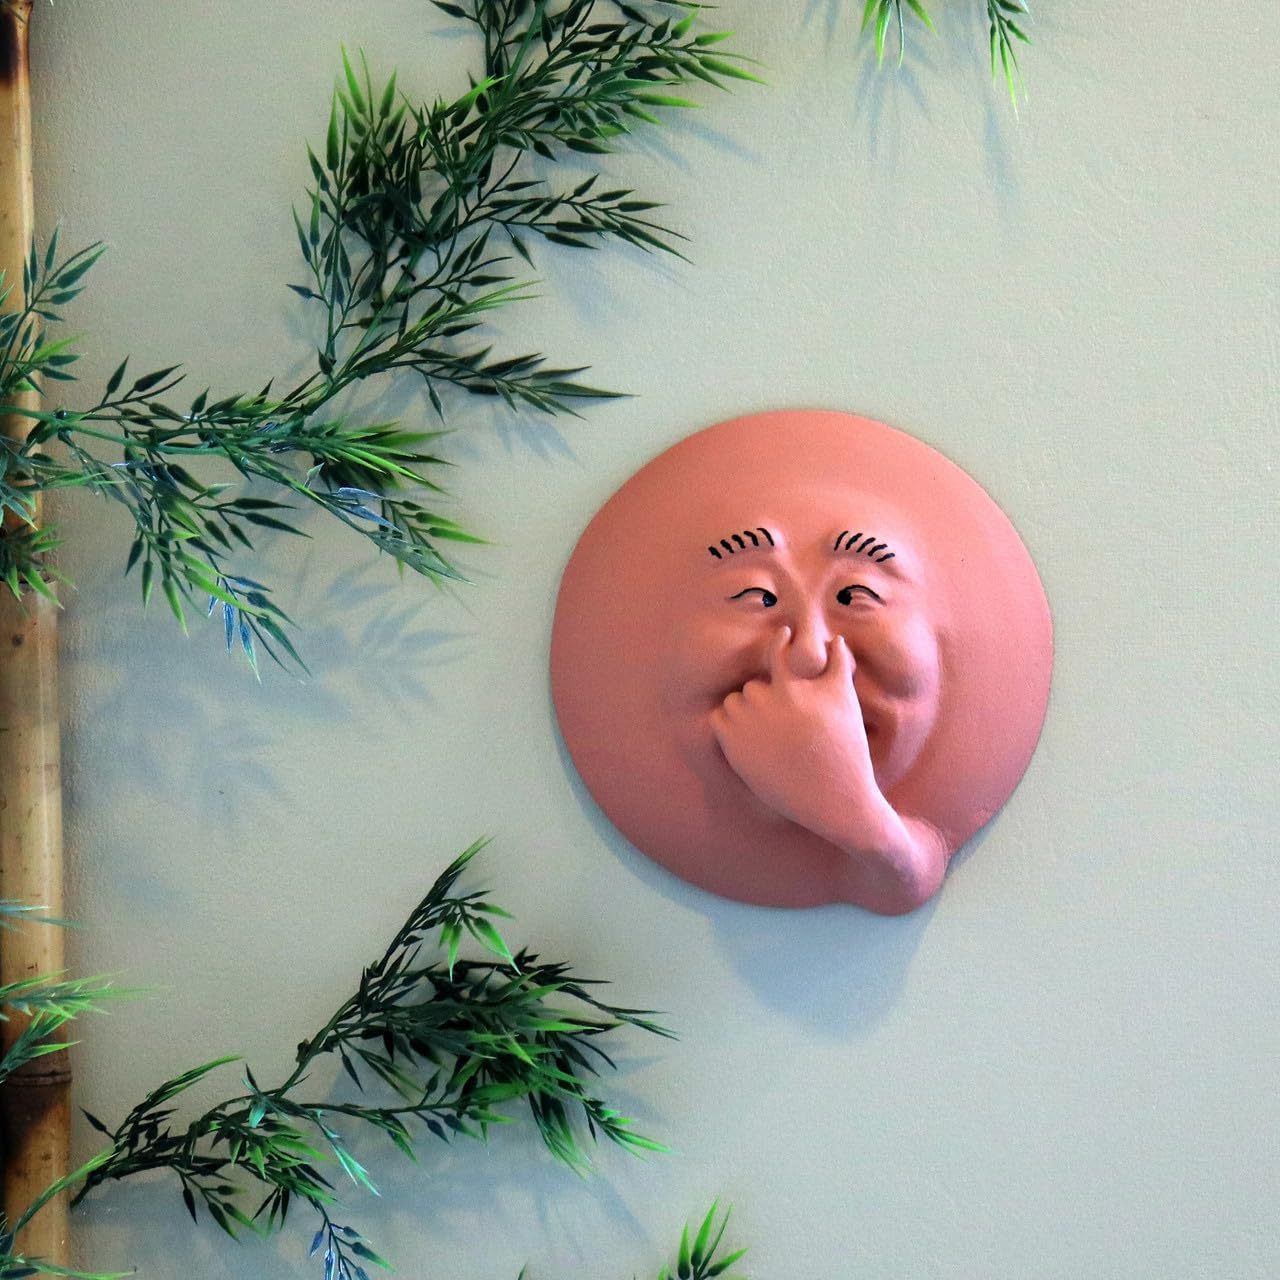 WhimsyWall Humorous Sculpture™